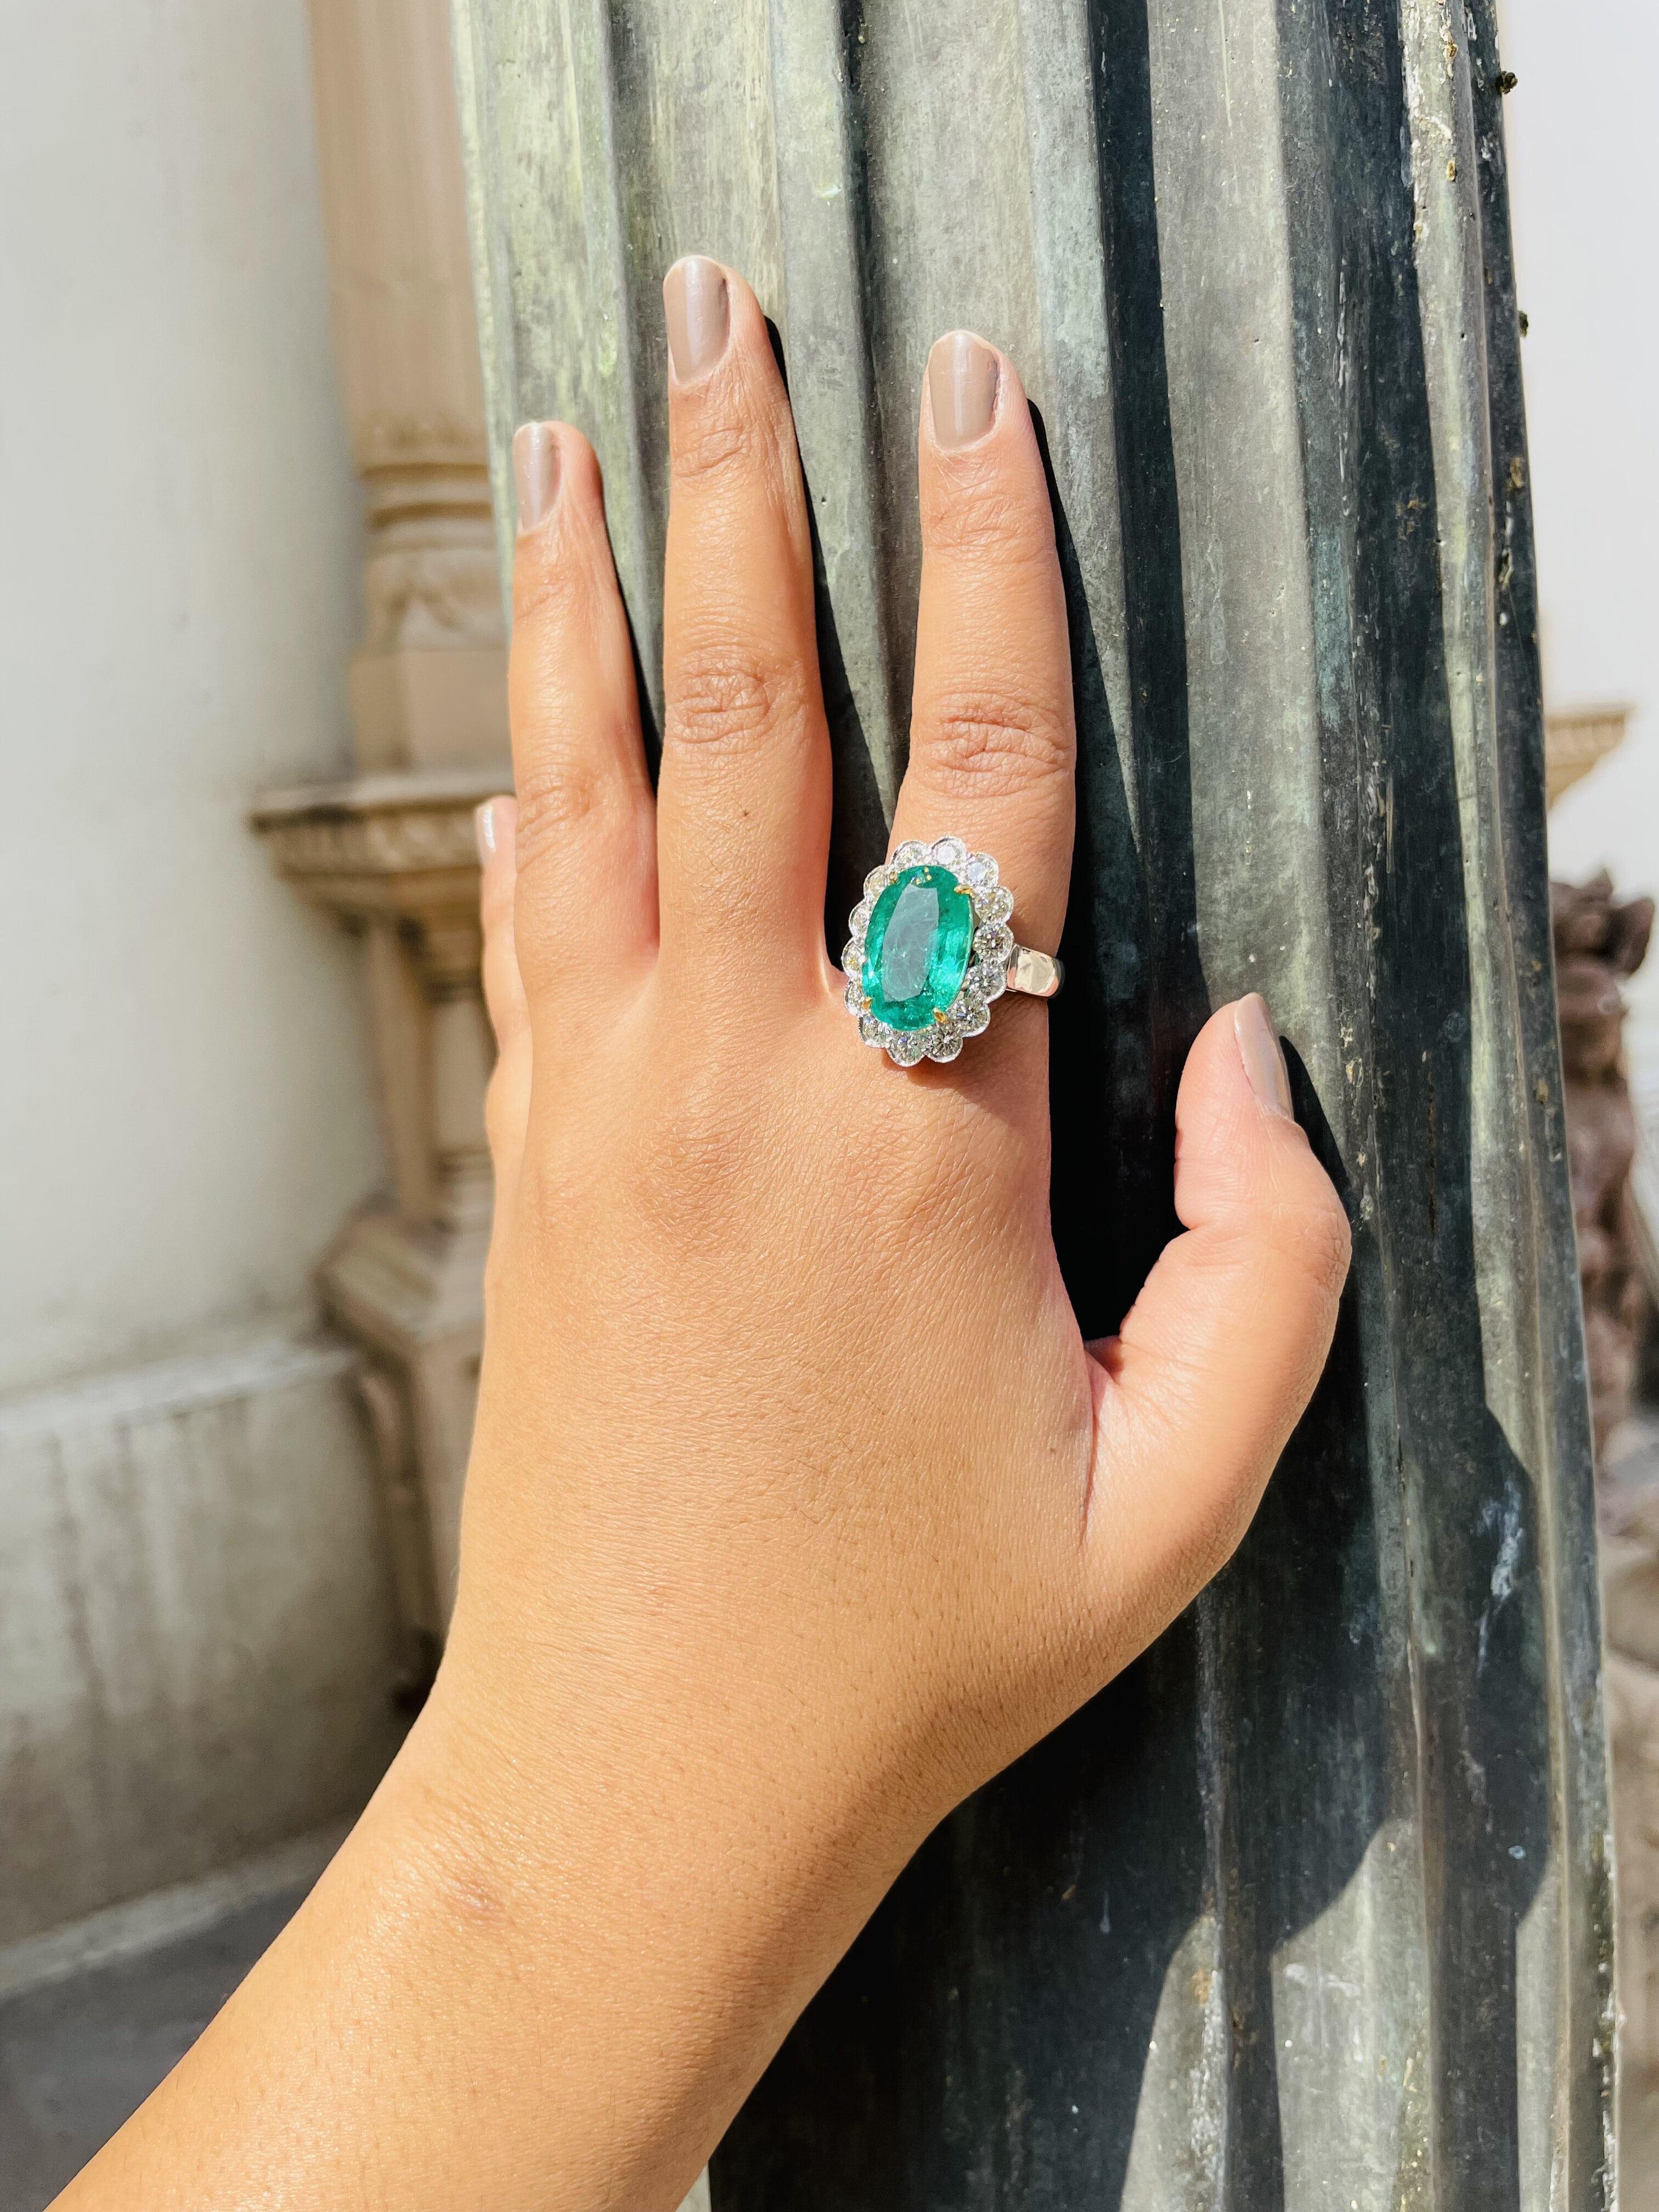 For Sale:  18kt Solid White Gold 8.21 Carat Emerald Gemstone Ring With Diamonds 3